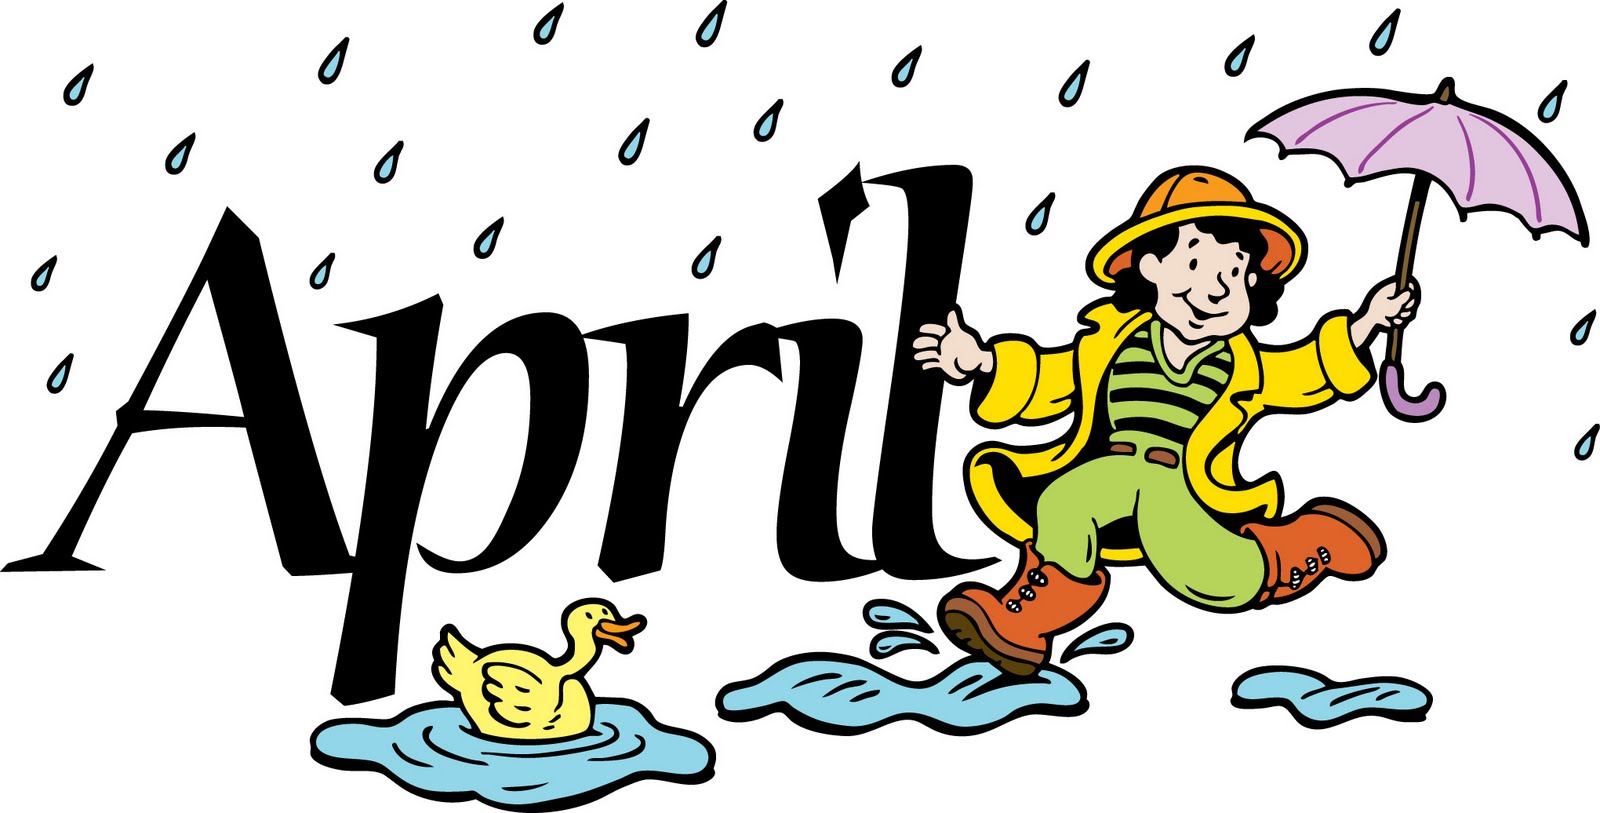 Free month of april clip art clipart image - Cliparting.com